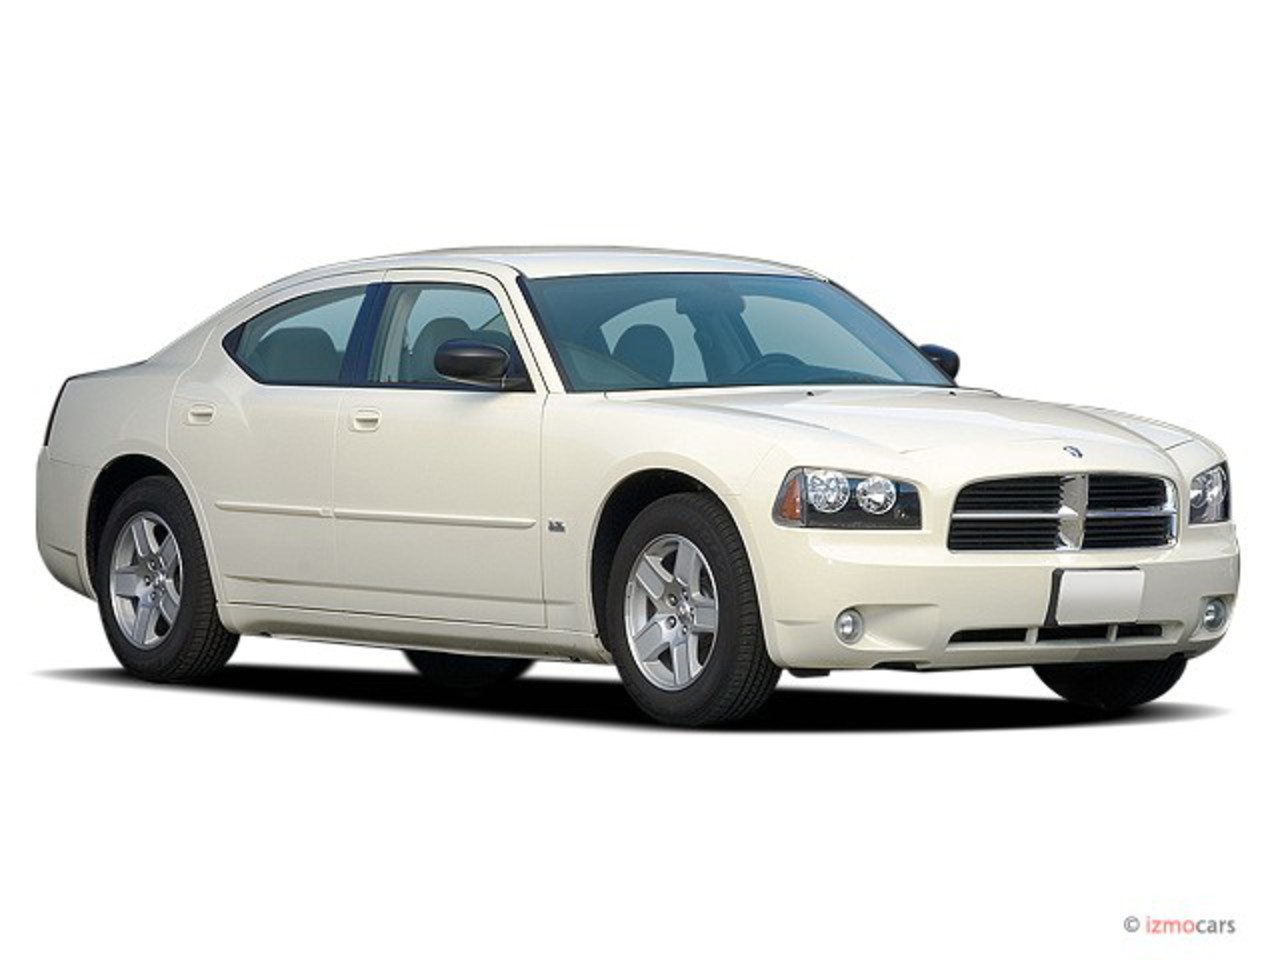 2007 Dodge Charger - Photo Gallery